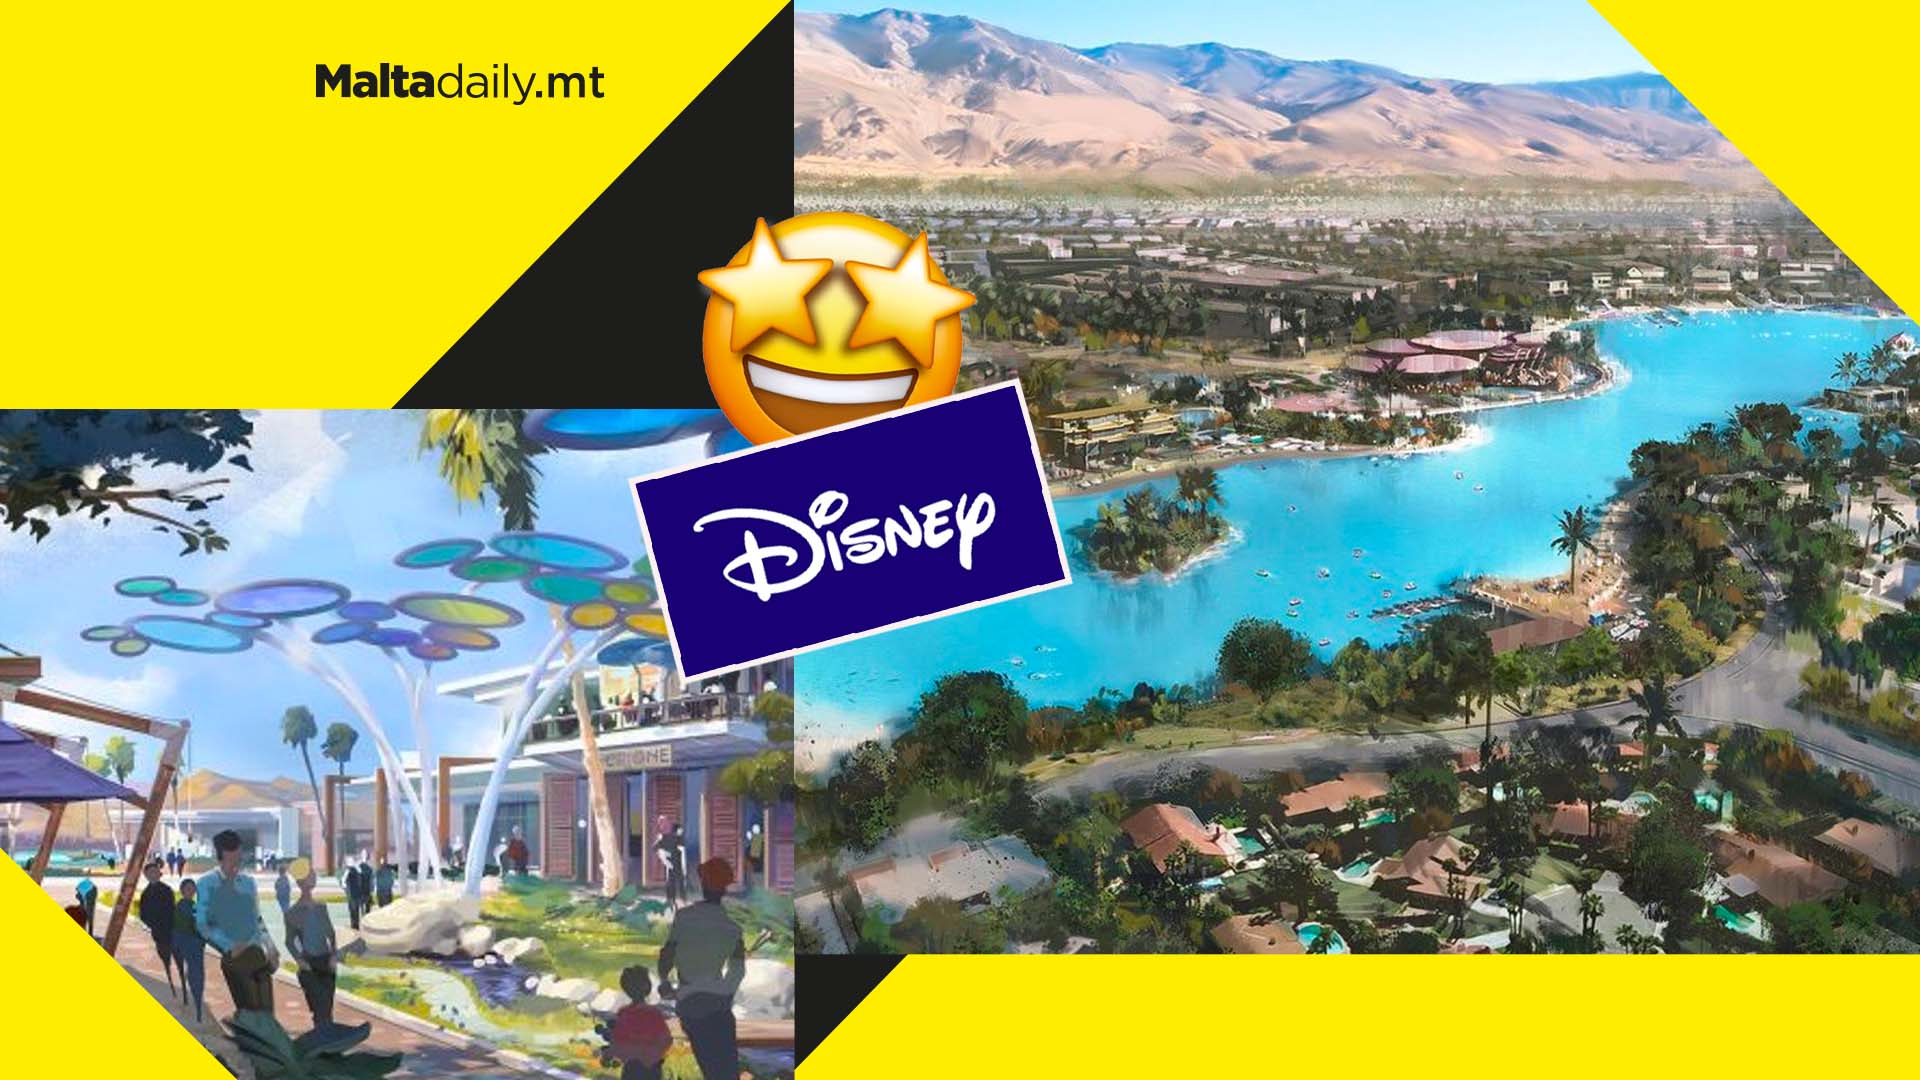 Disney building a village community where people can actually stay forever